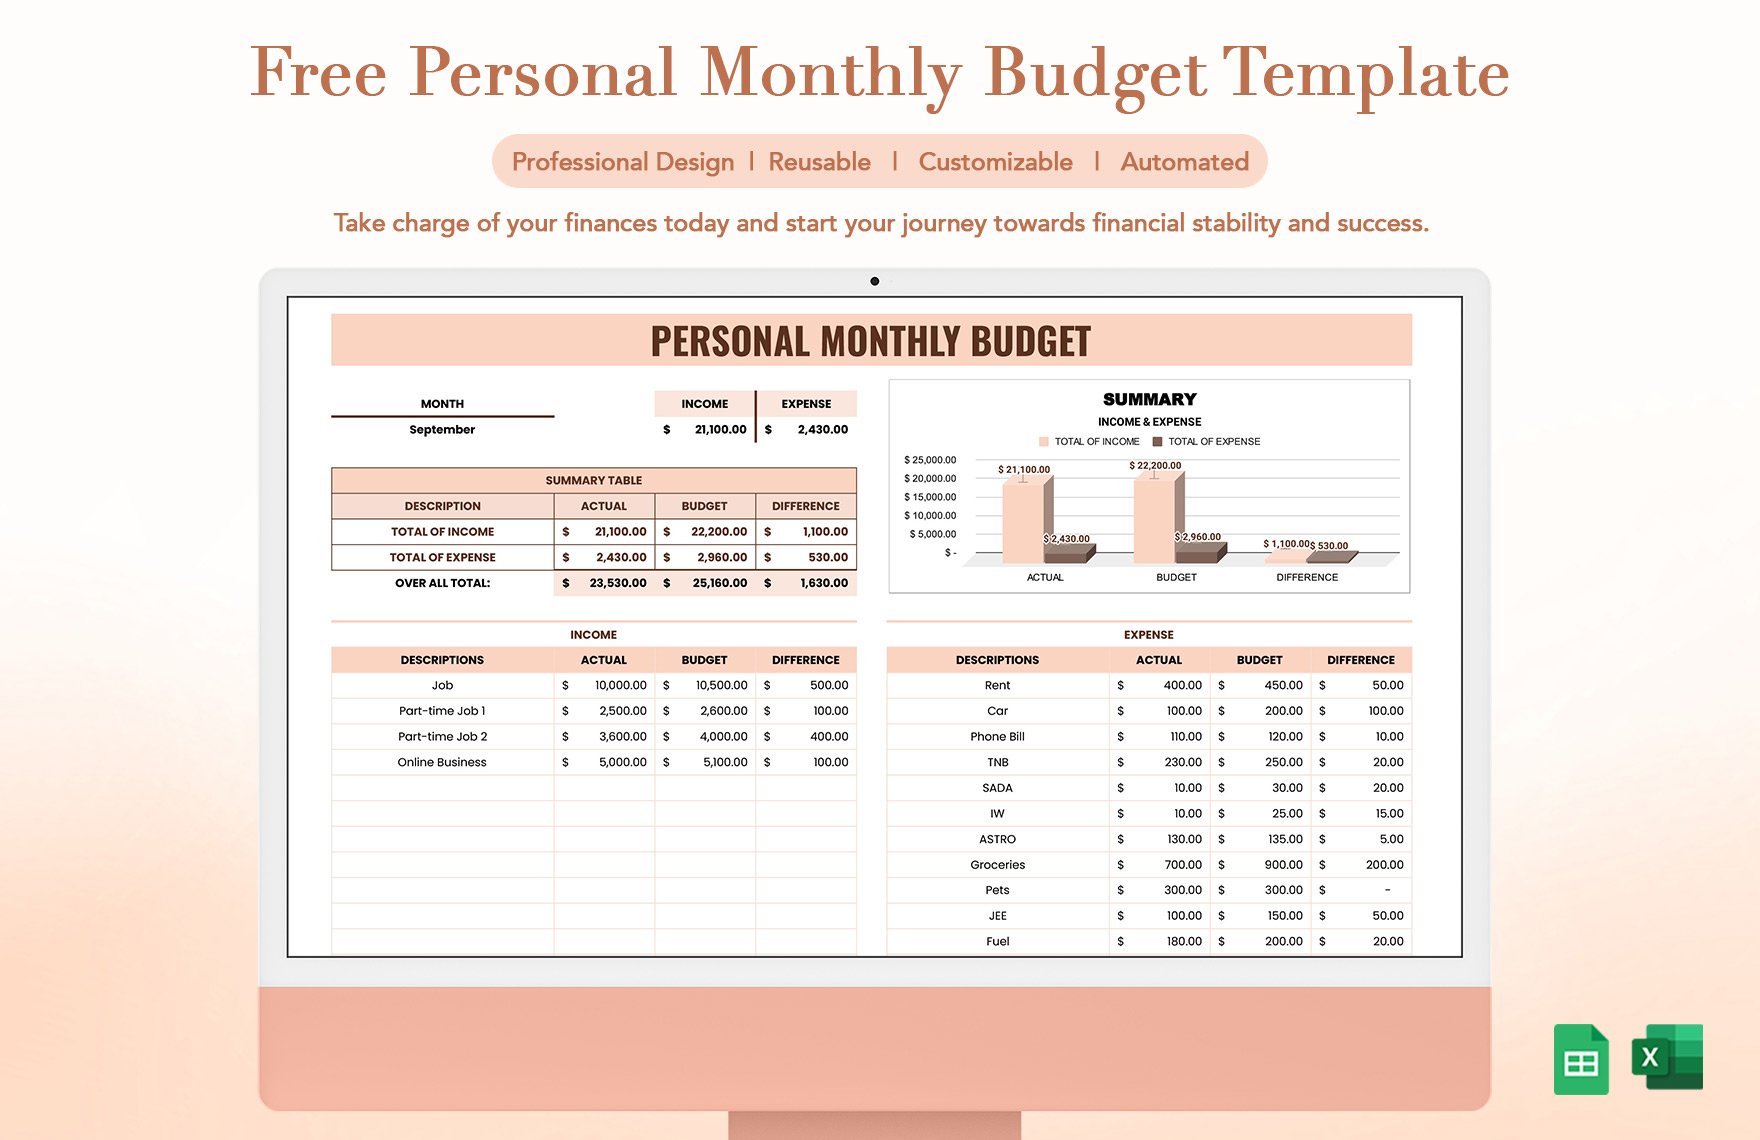 Free Personal Monthly Budget Template